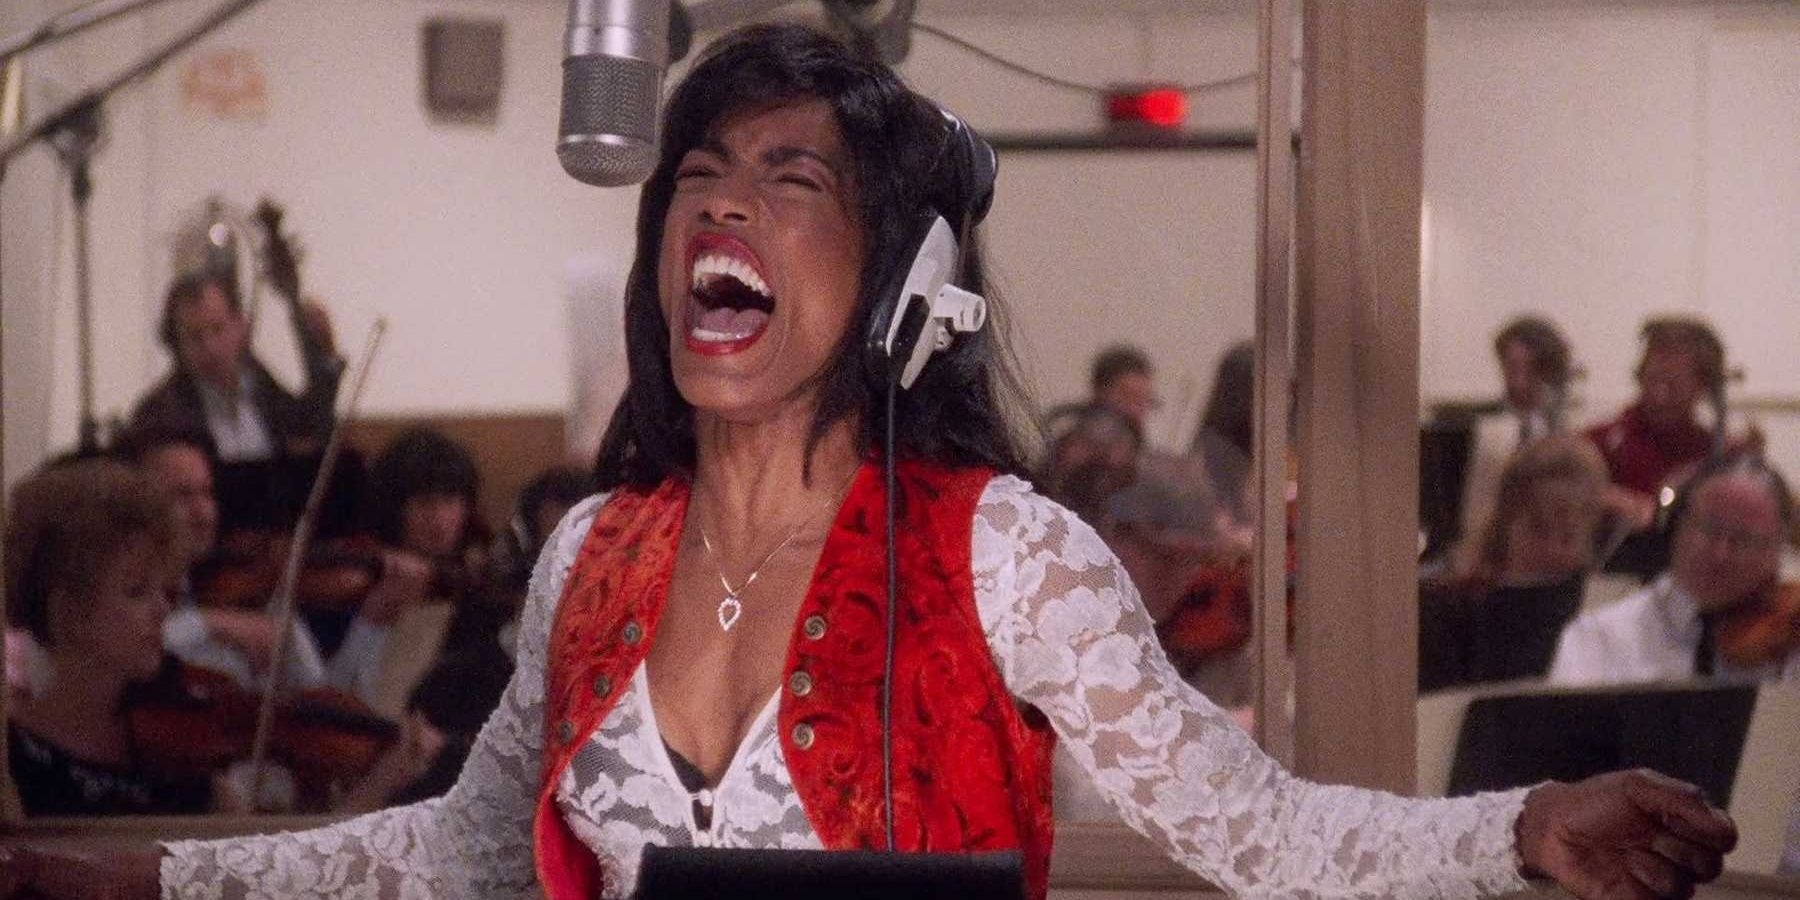 Angela Bassett as Tina Turner singing in What's Love Got To Do With It